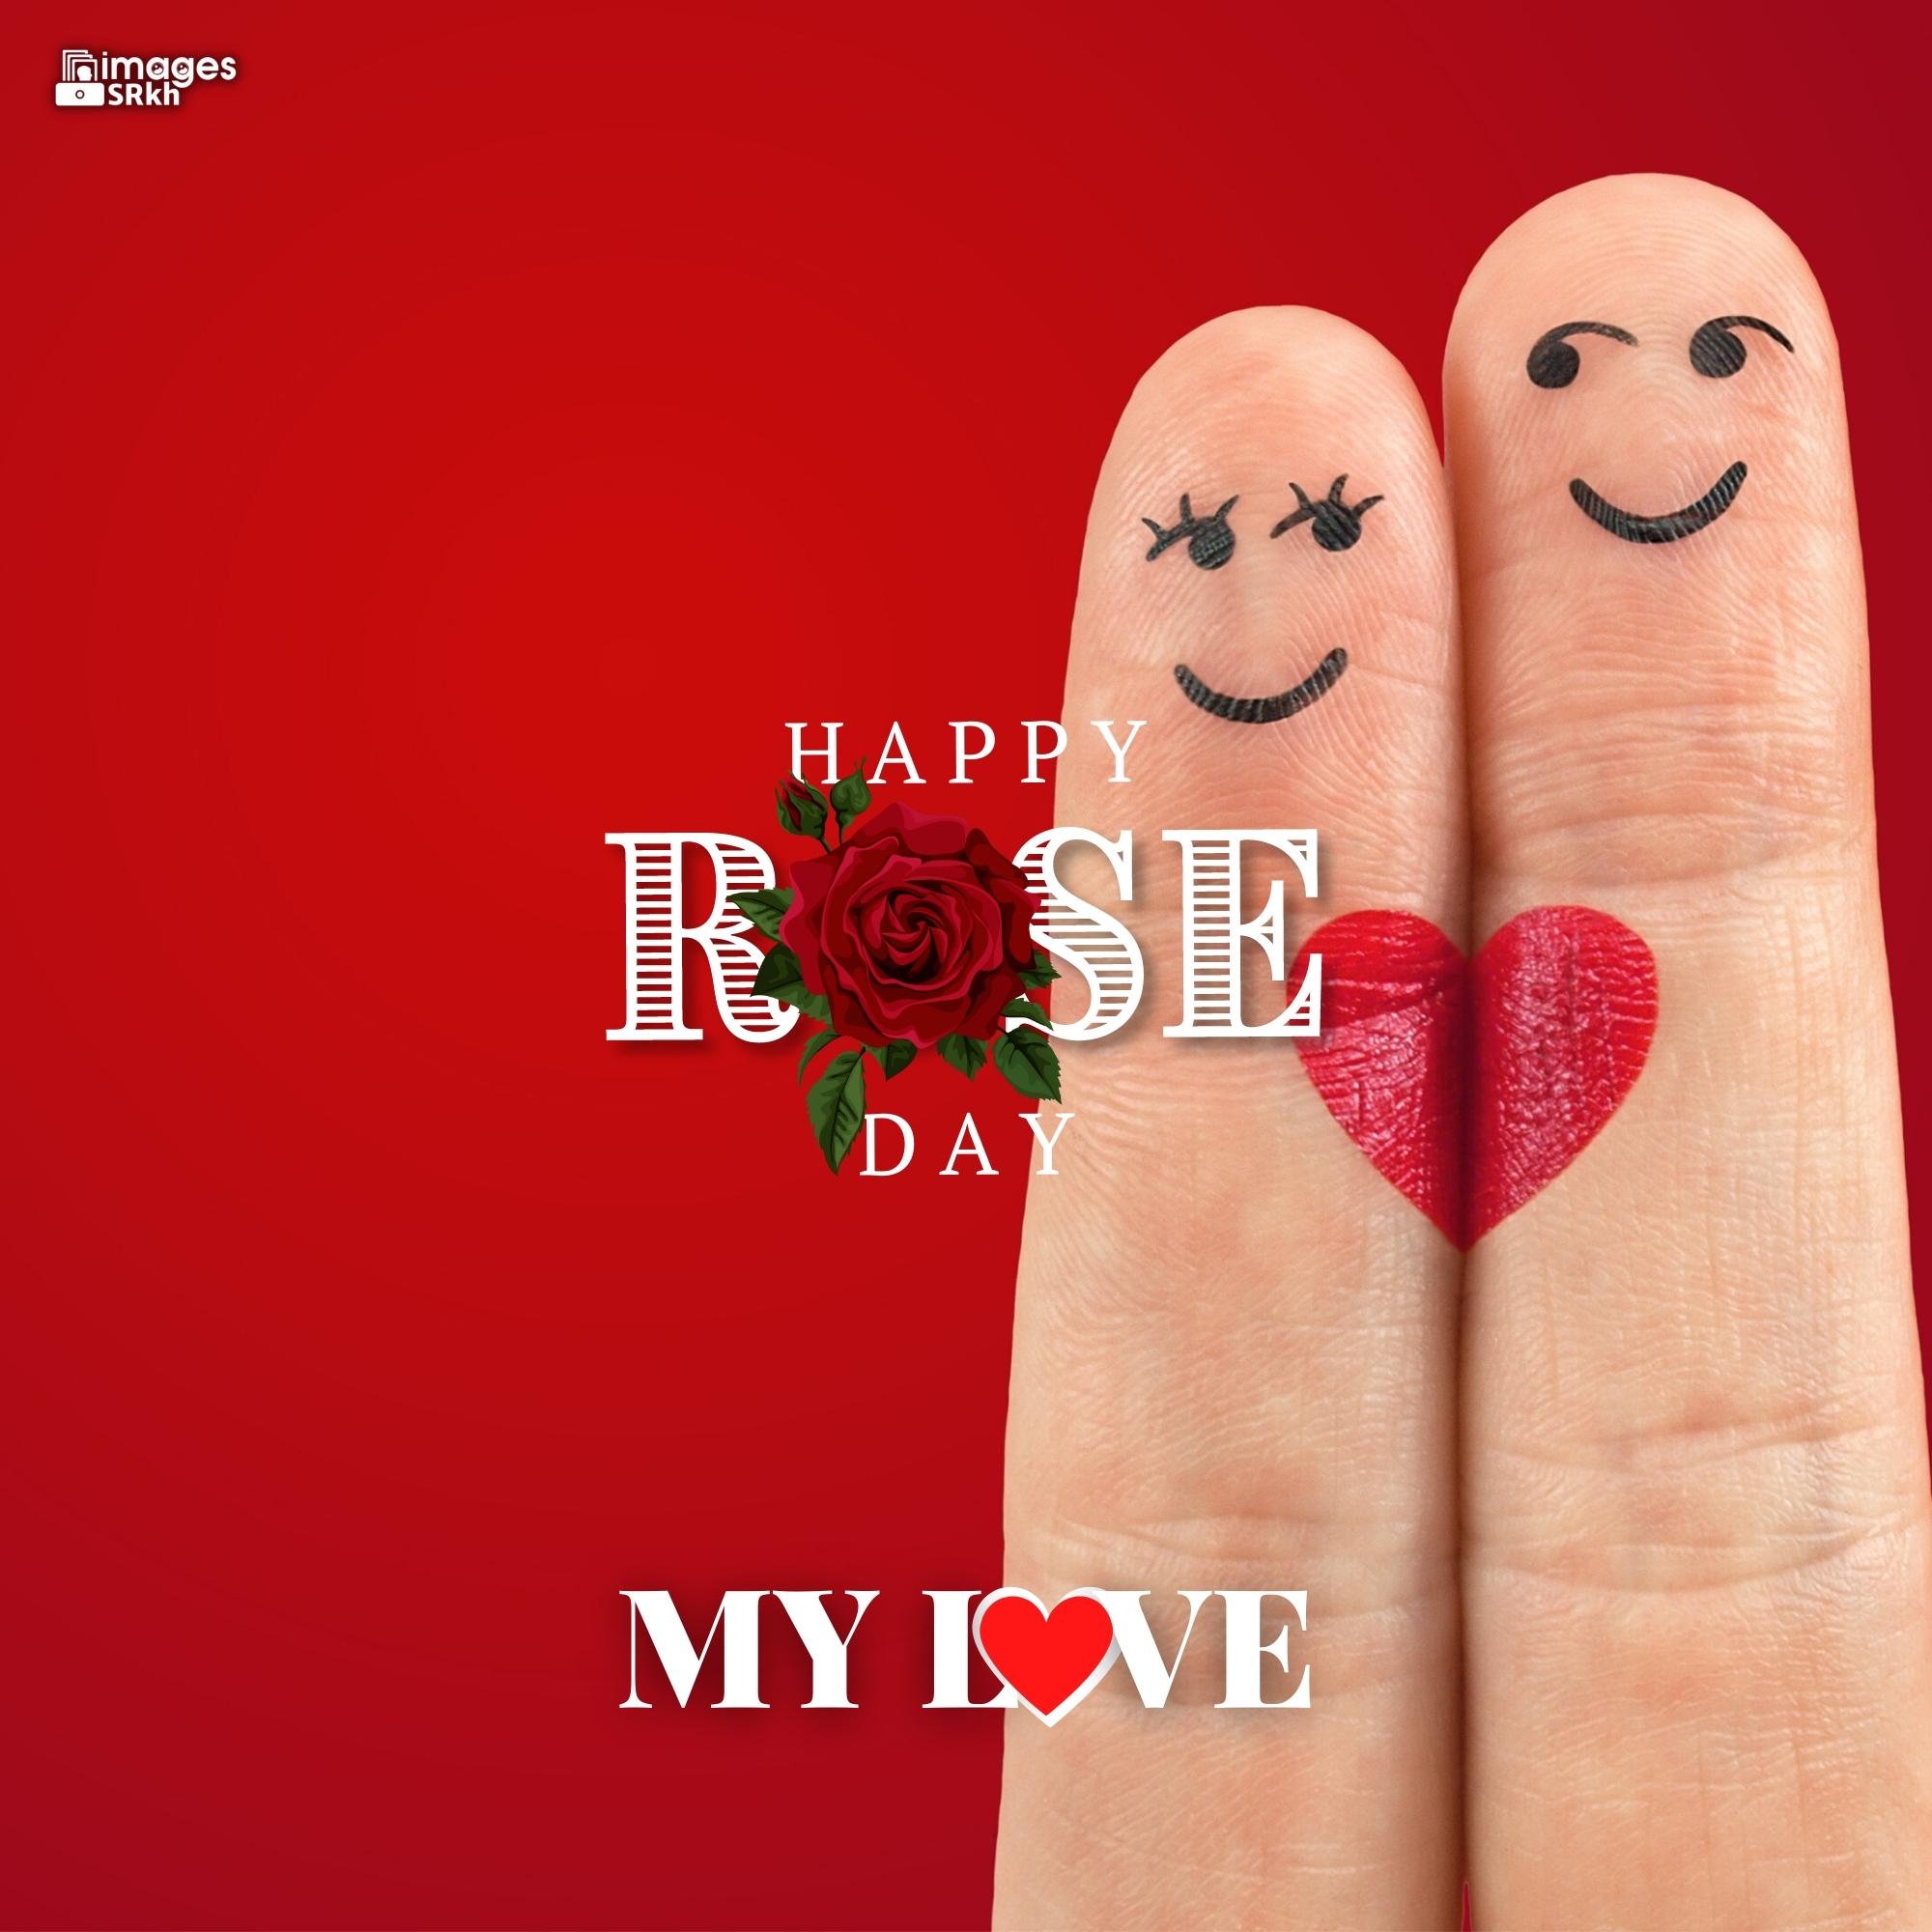 Happy Rose Day My Love (11) | HD IMAGES